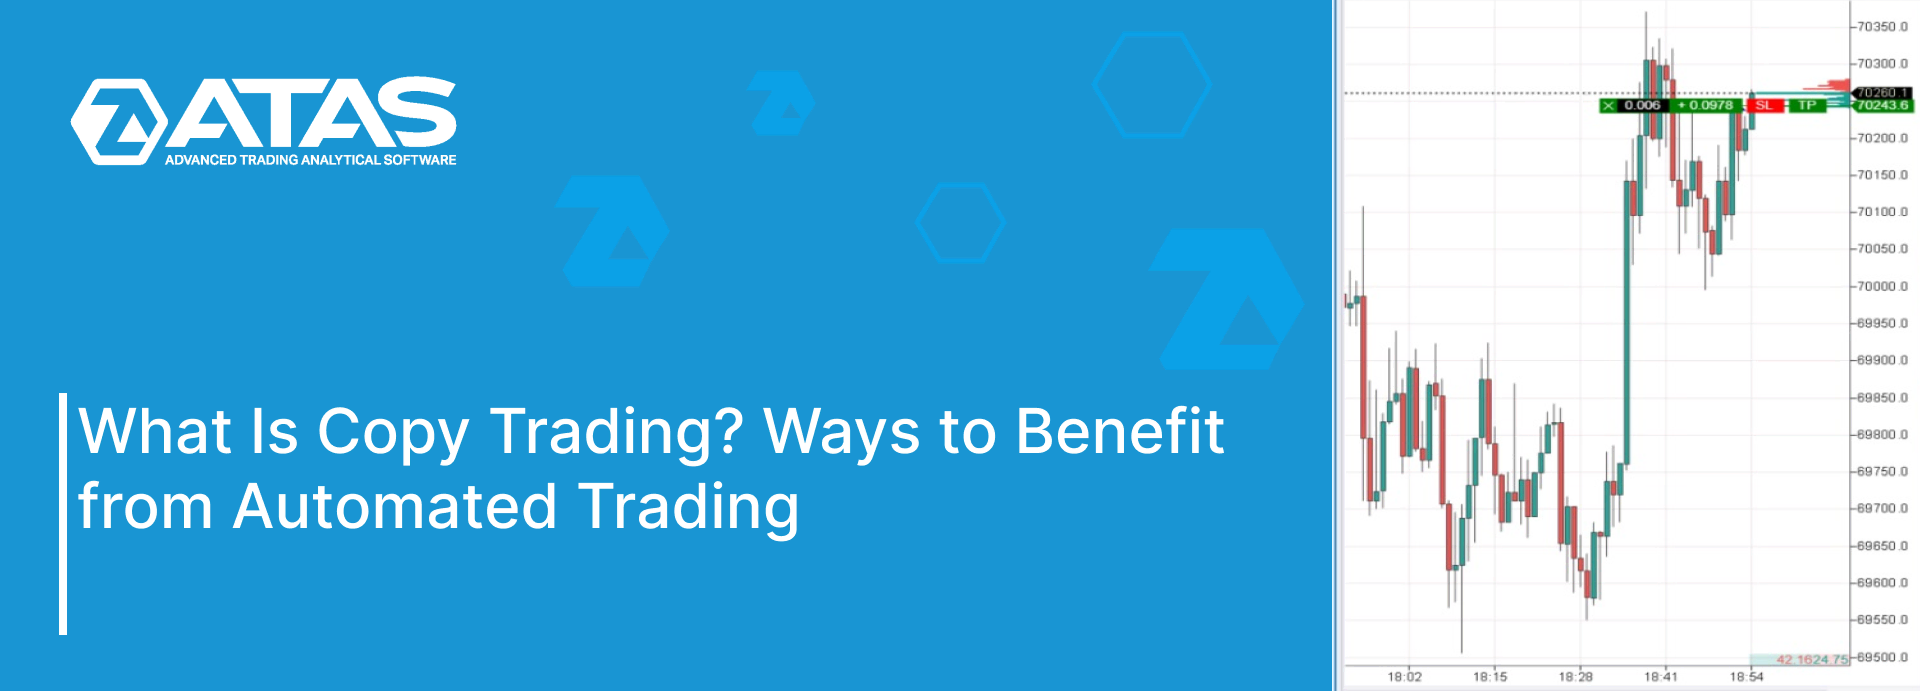 Ways to Benefit from Automated Trading